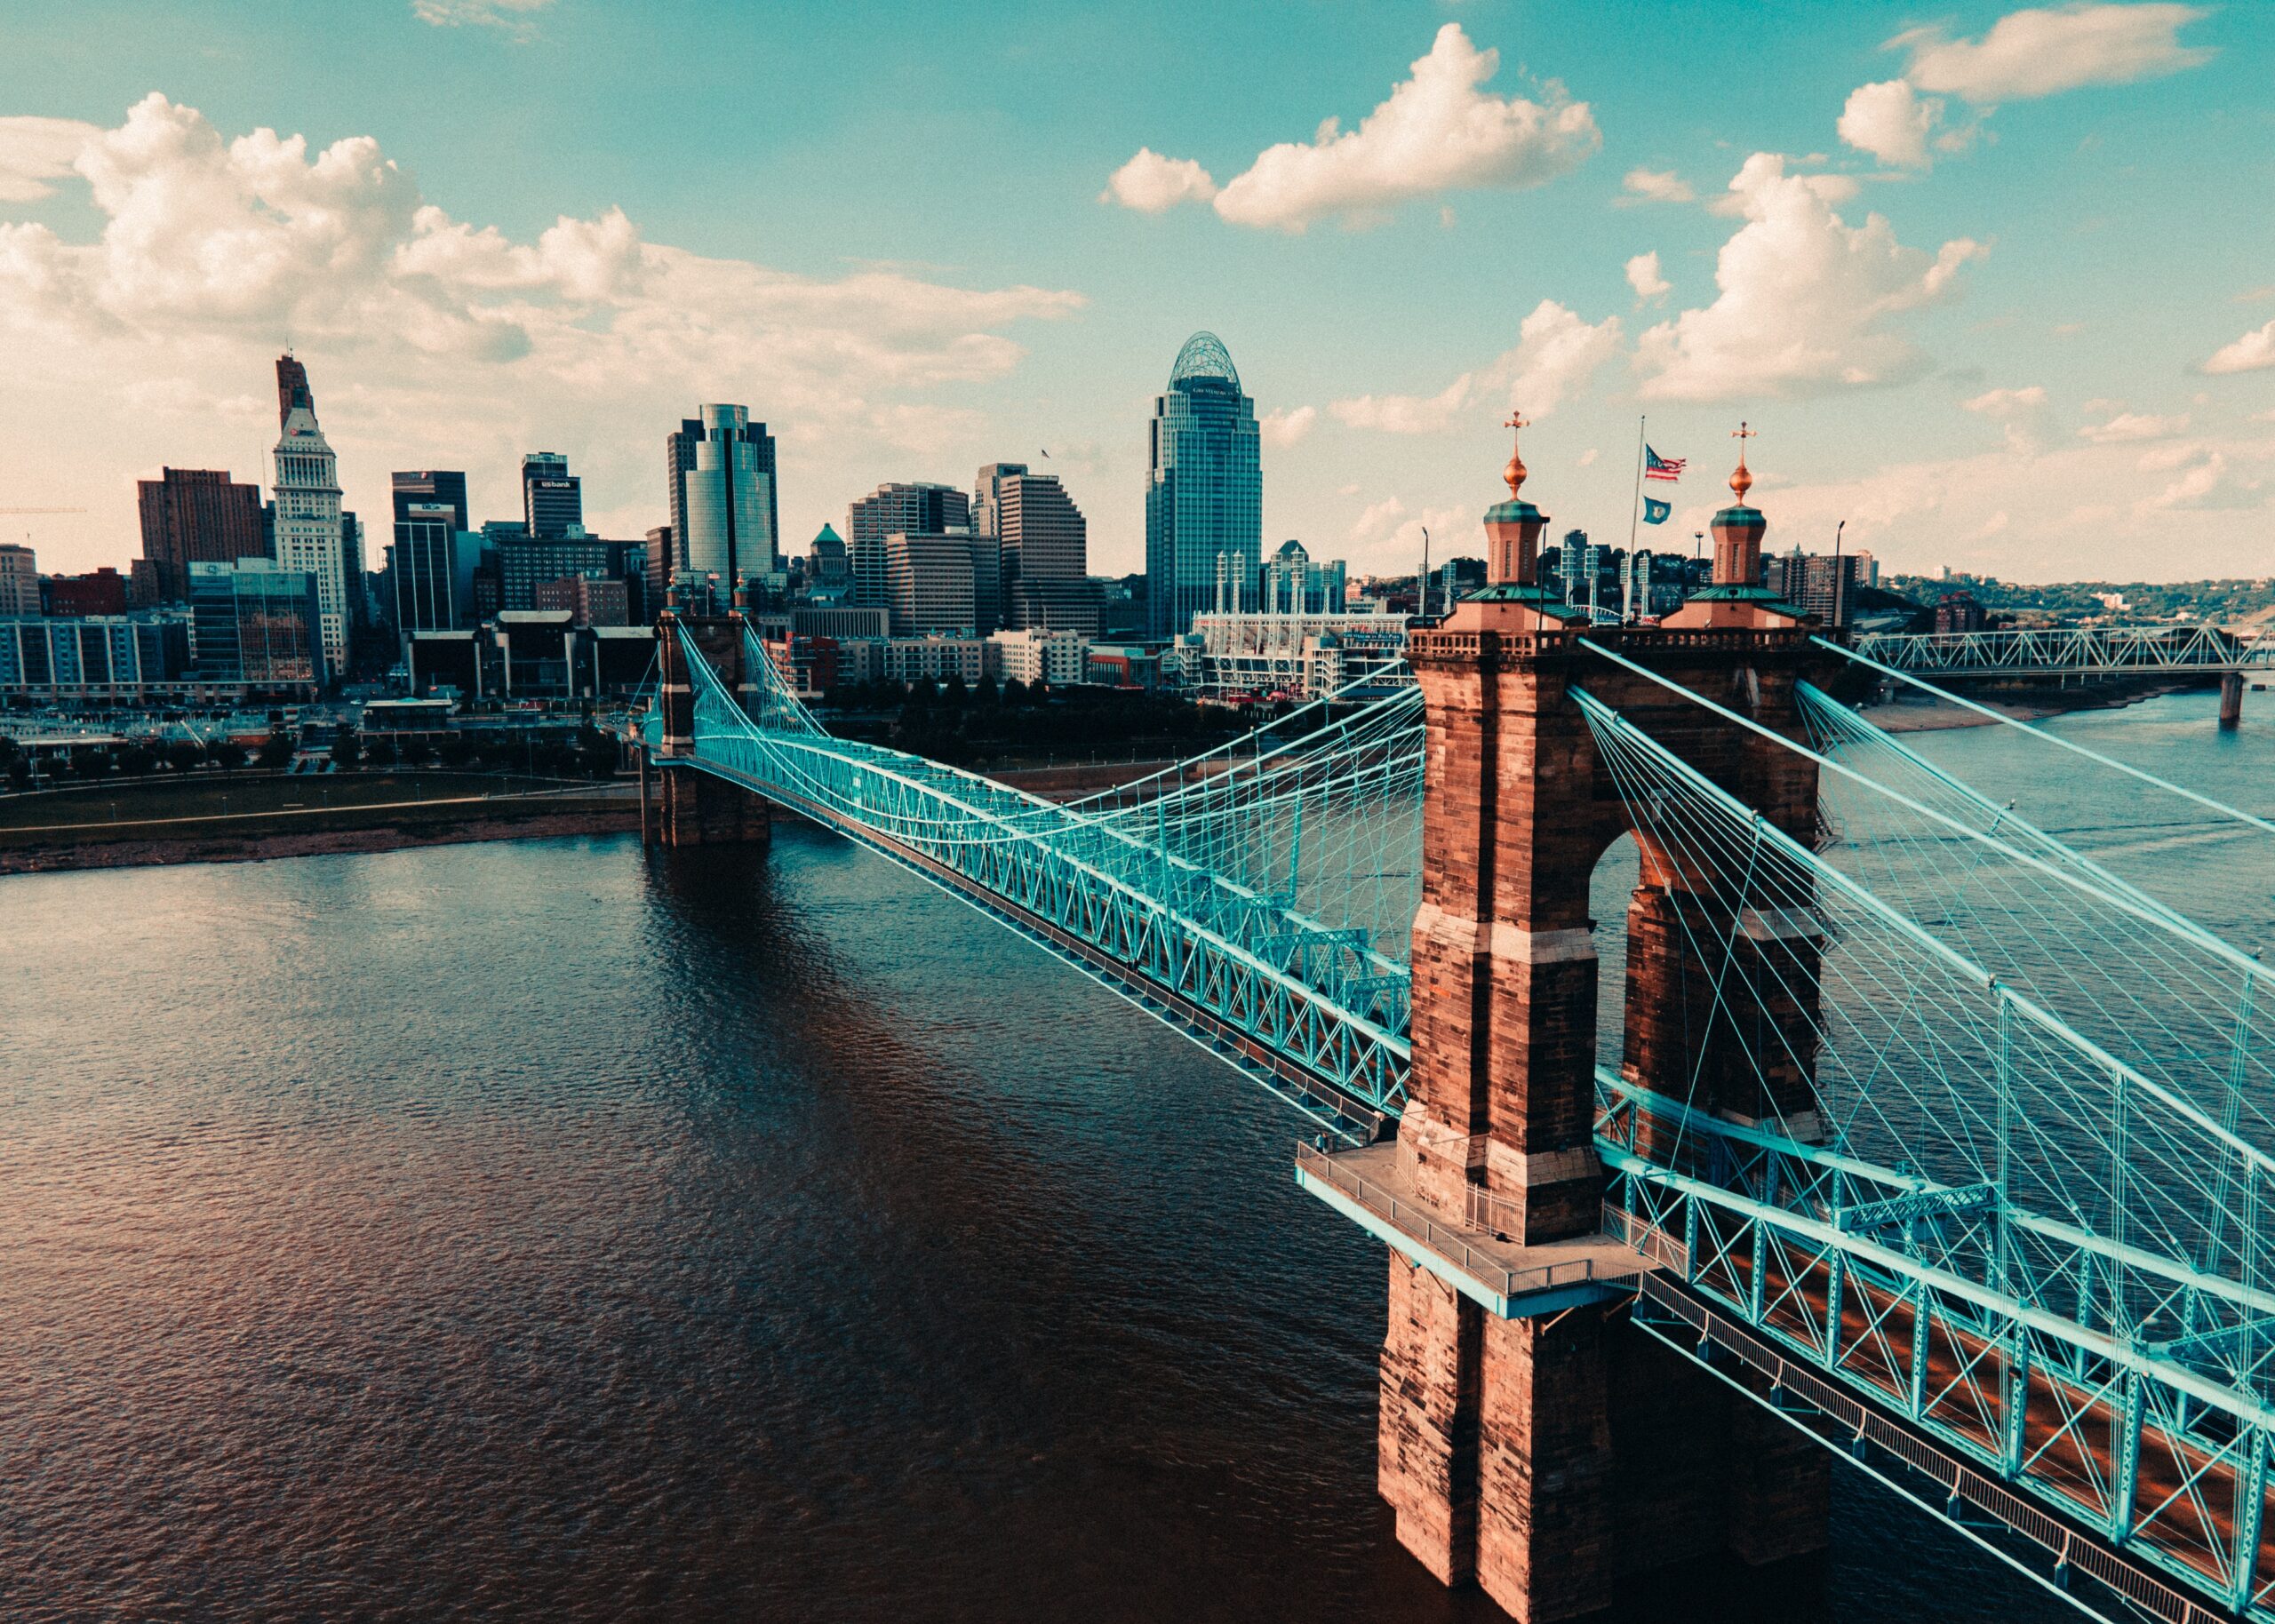 Cincinnati is a relatively safe place to visit. Check out the best places to stay to have a safe trip. 
pictured: The Cincinnati bridge and river on a bright cloudy day 